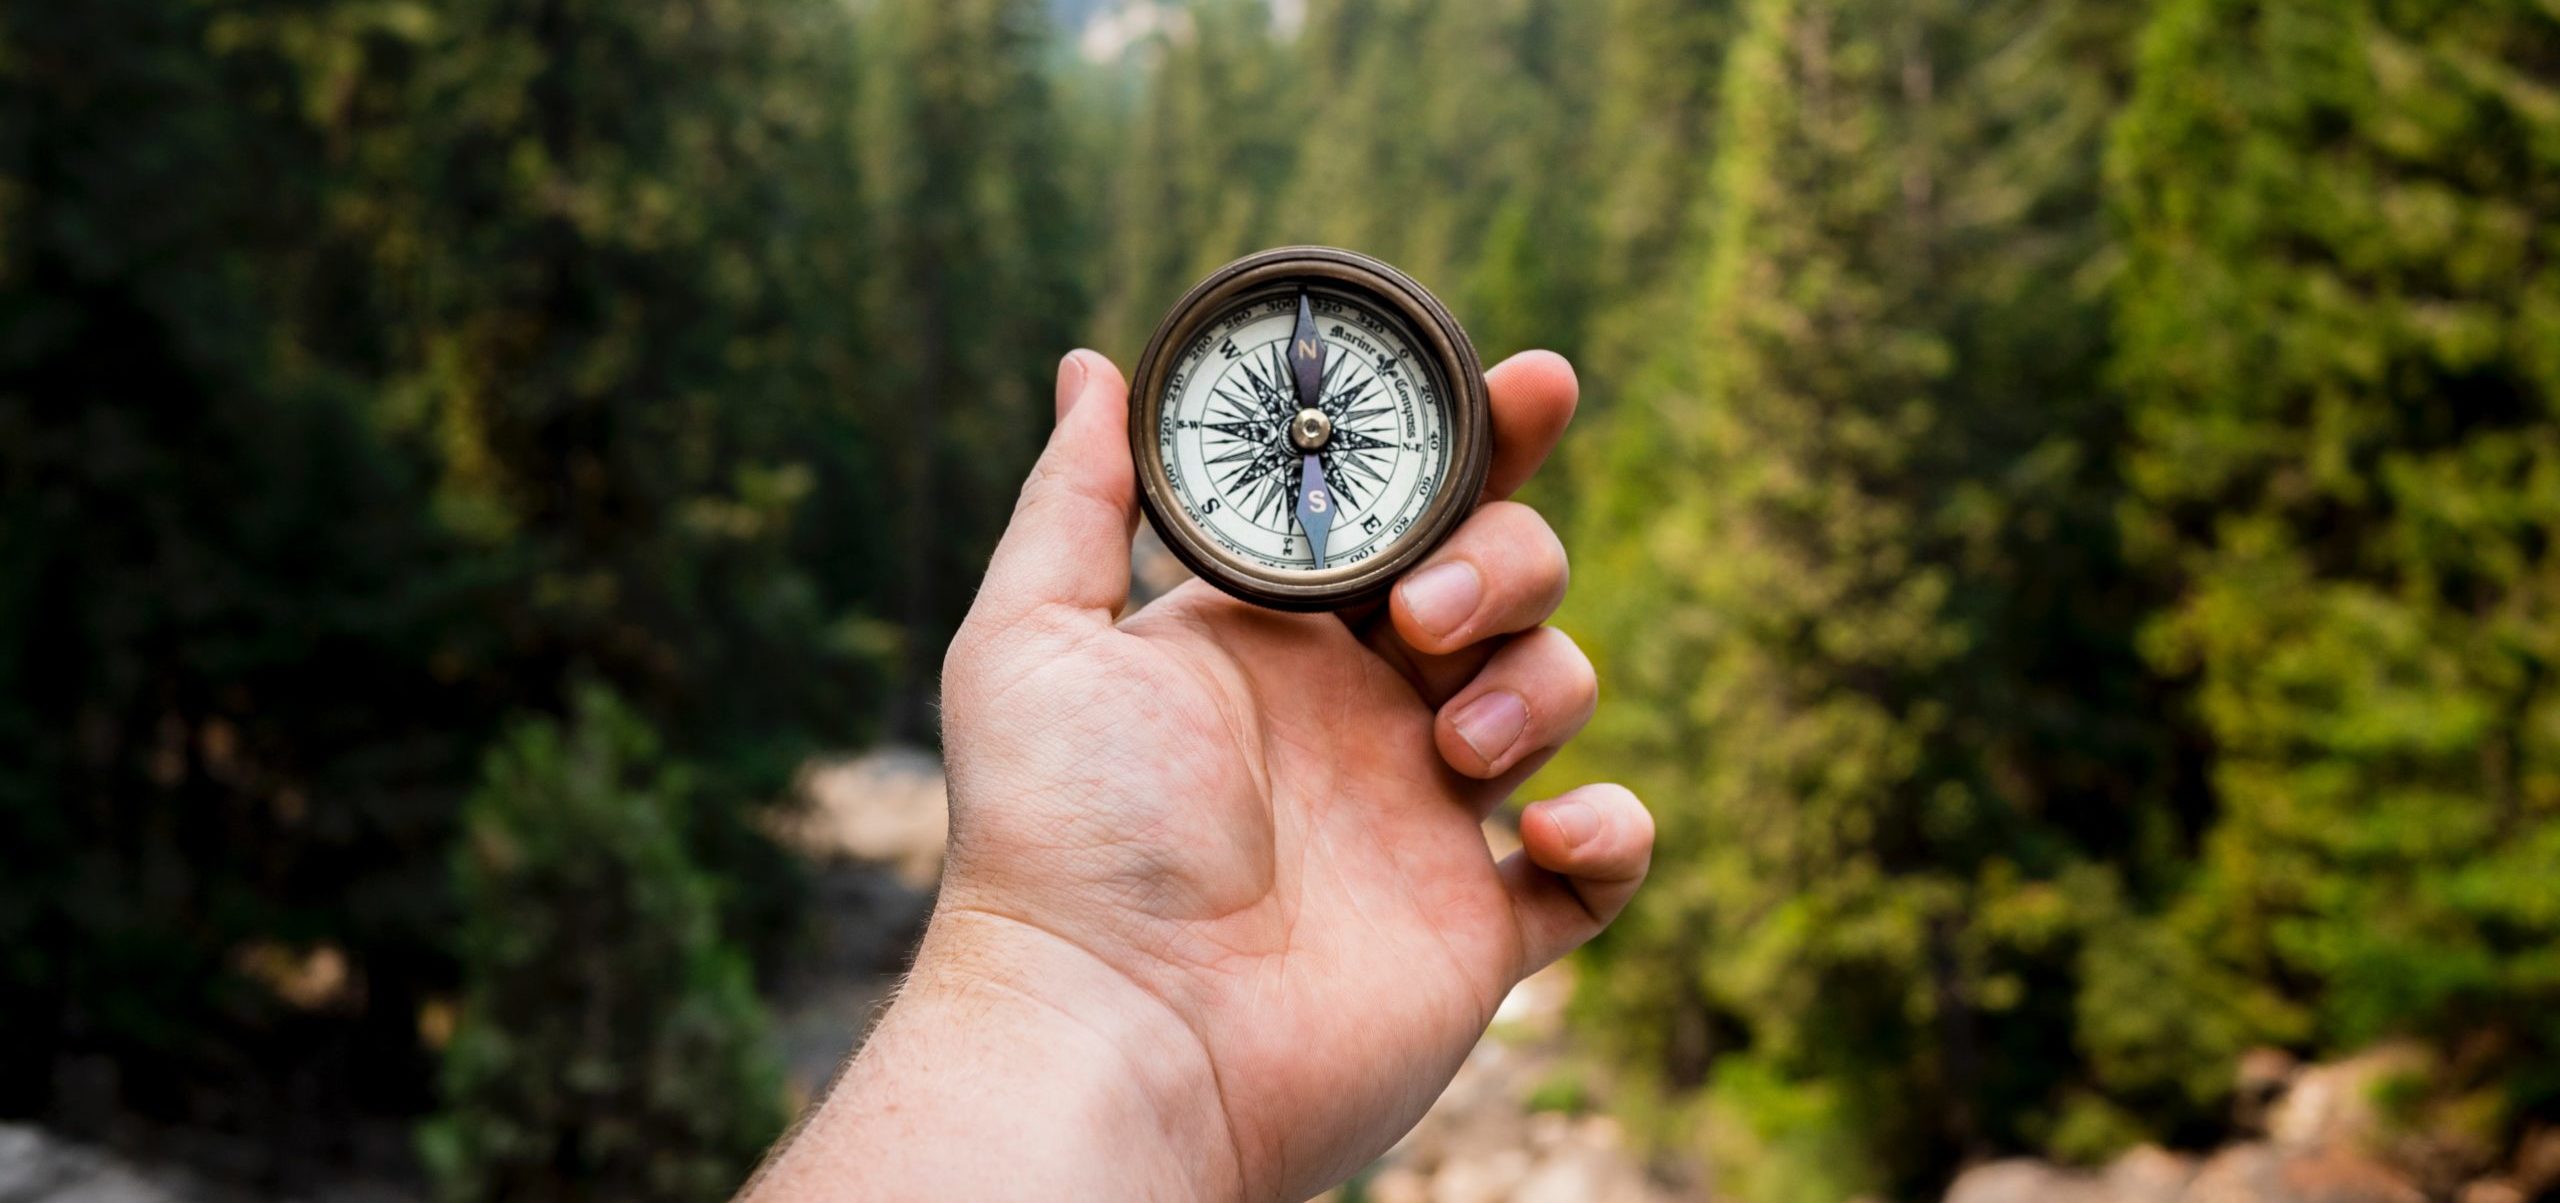 A hand holding a compass with a forest in the background.